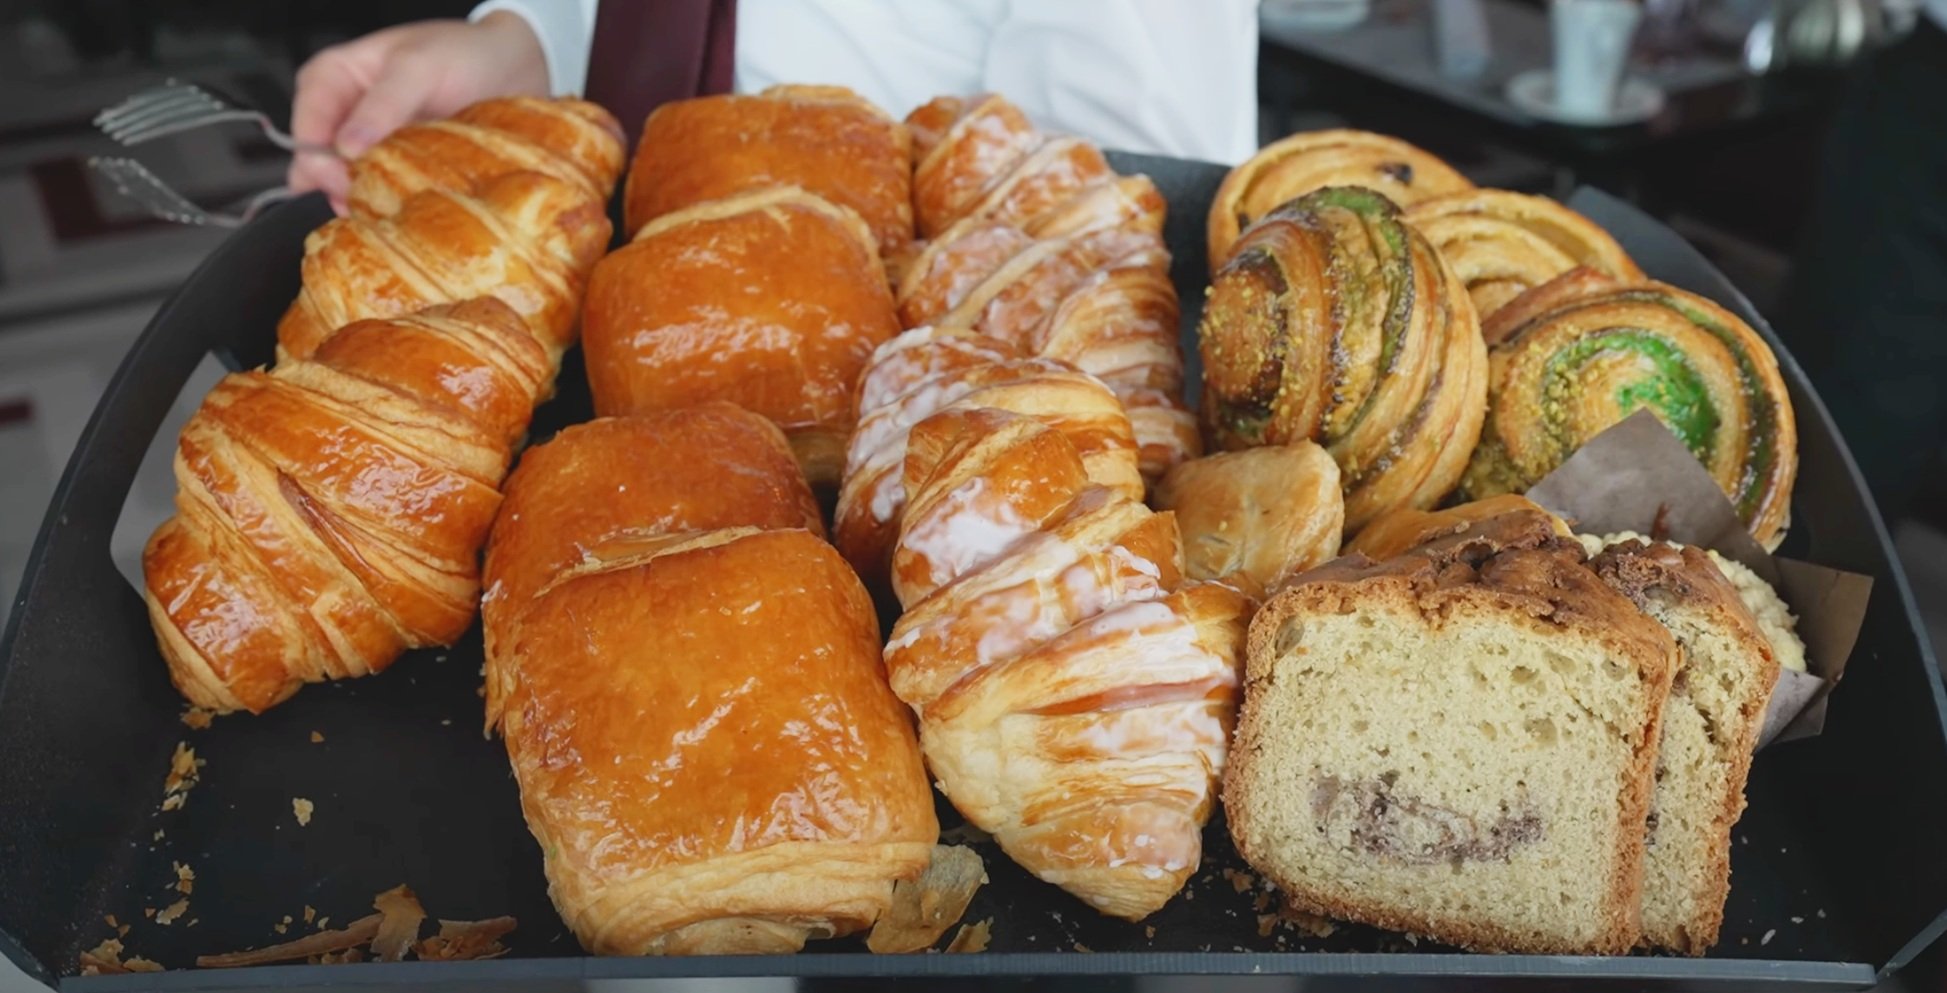  Look at those pastries! 